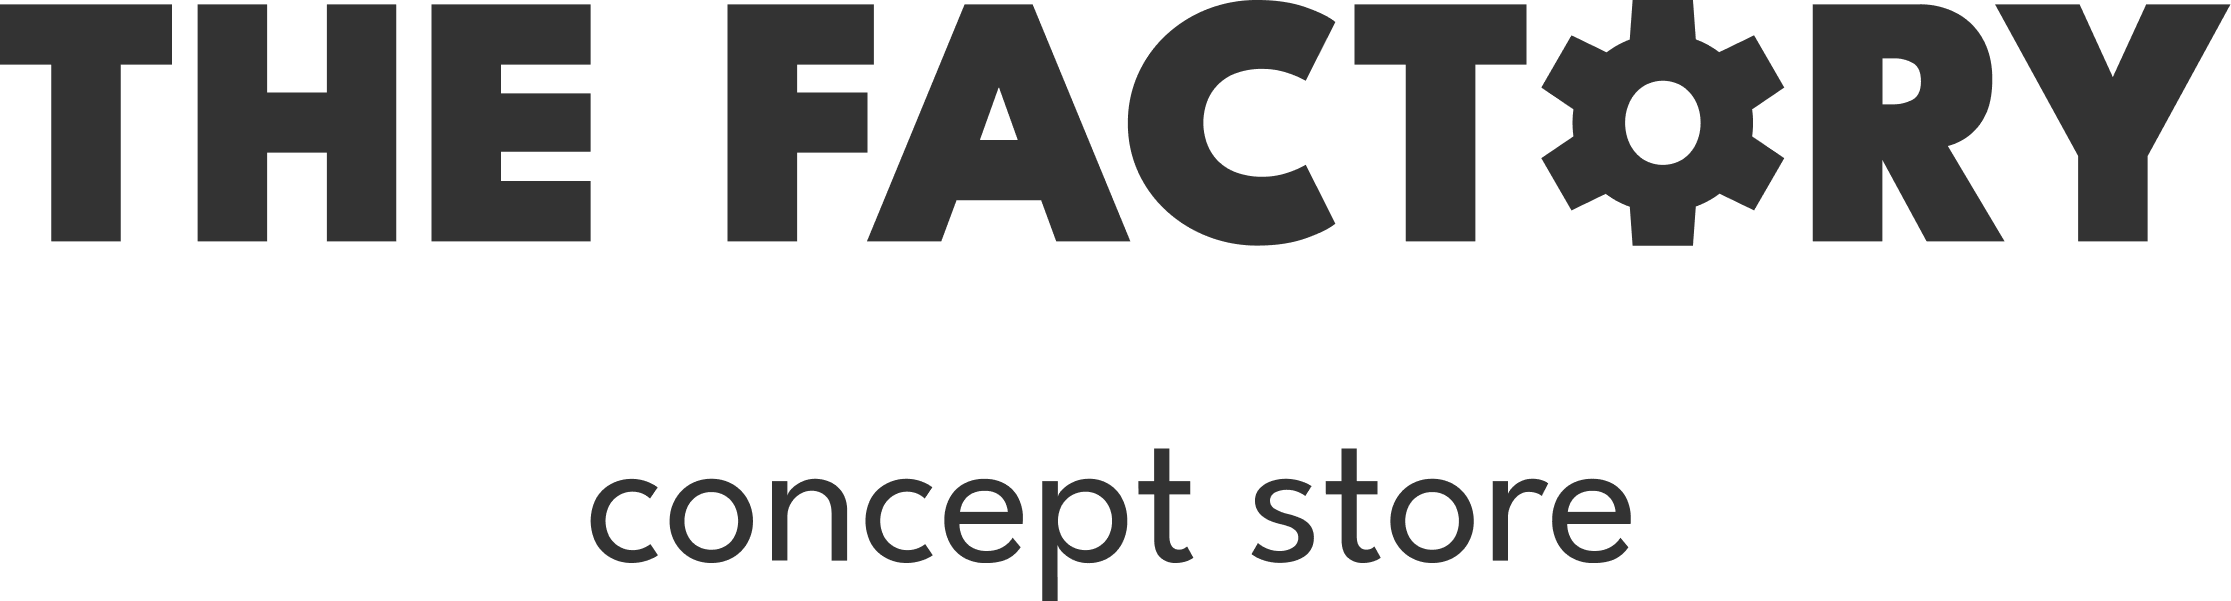 The Factory Concept Store